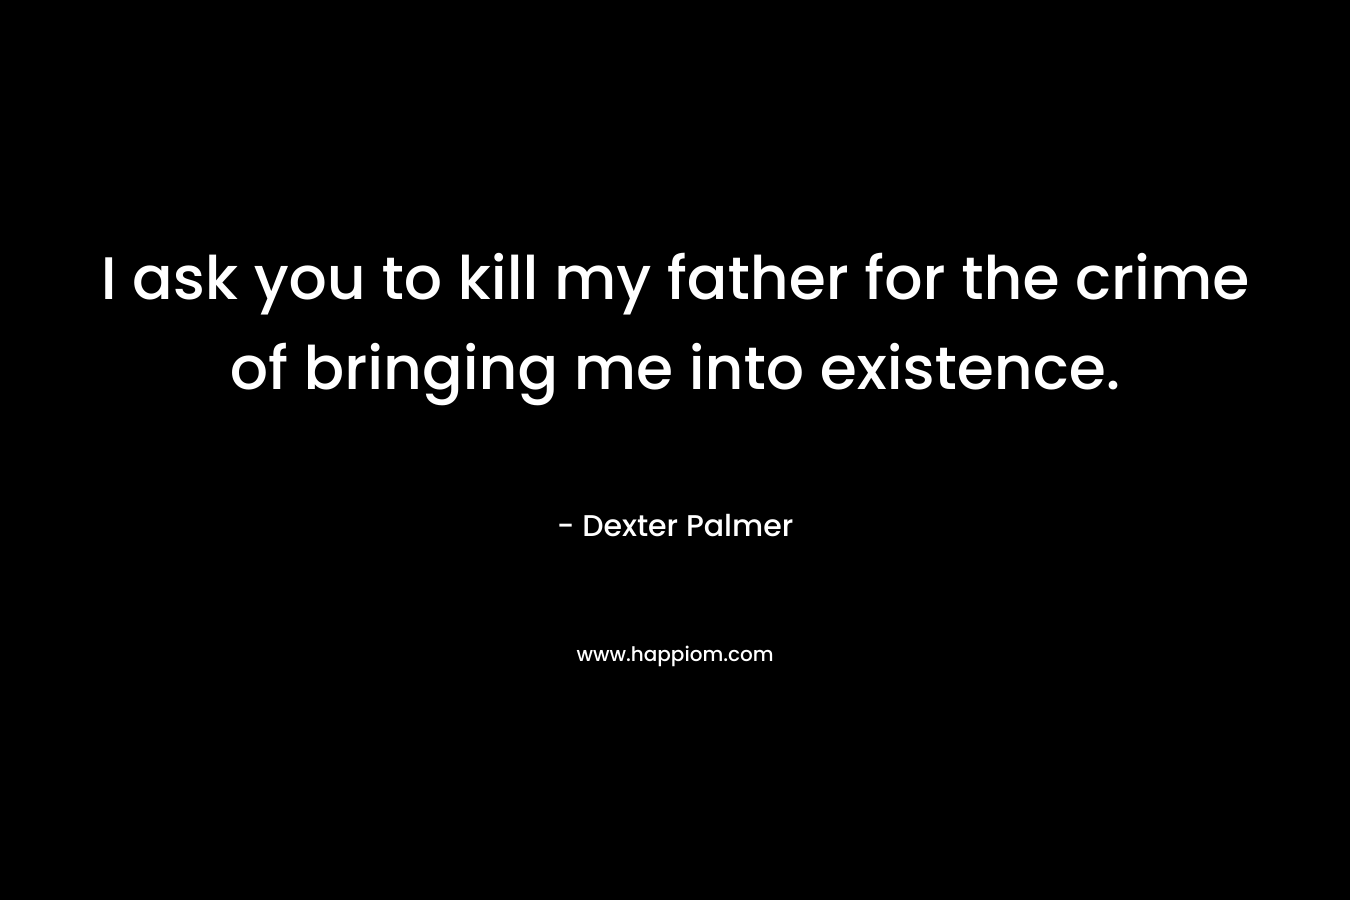 I ask you to kill my father for the crime of bringing me into existence. – Dexter Palmer